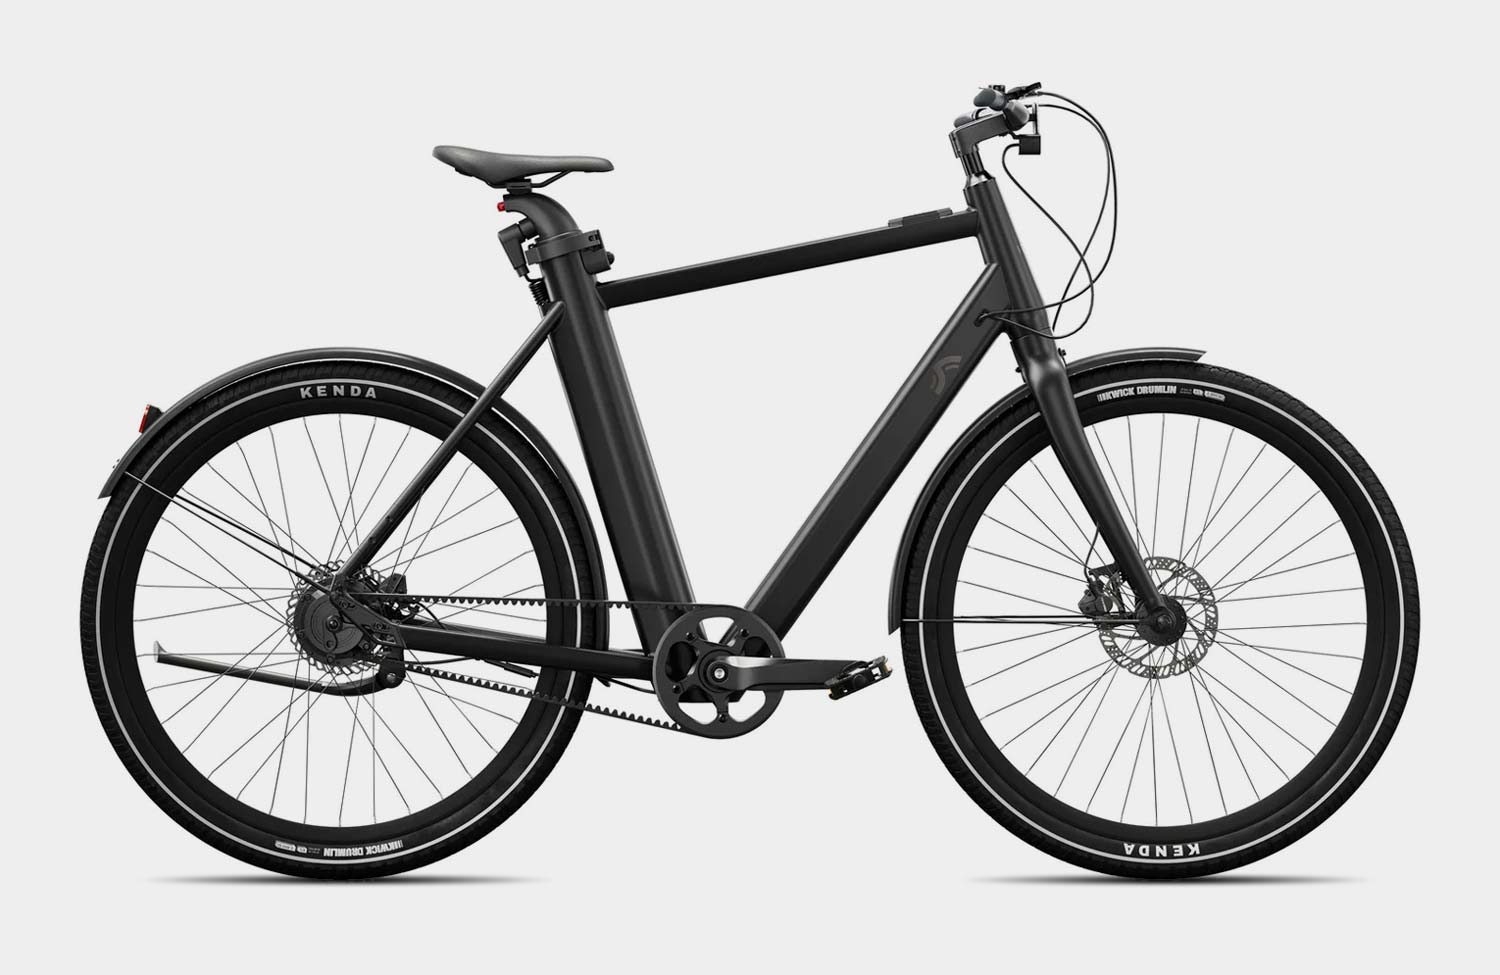 — e-bike from bike urban we the the from a Crivit new at take discounter: An look Lidl